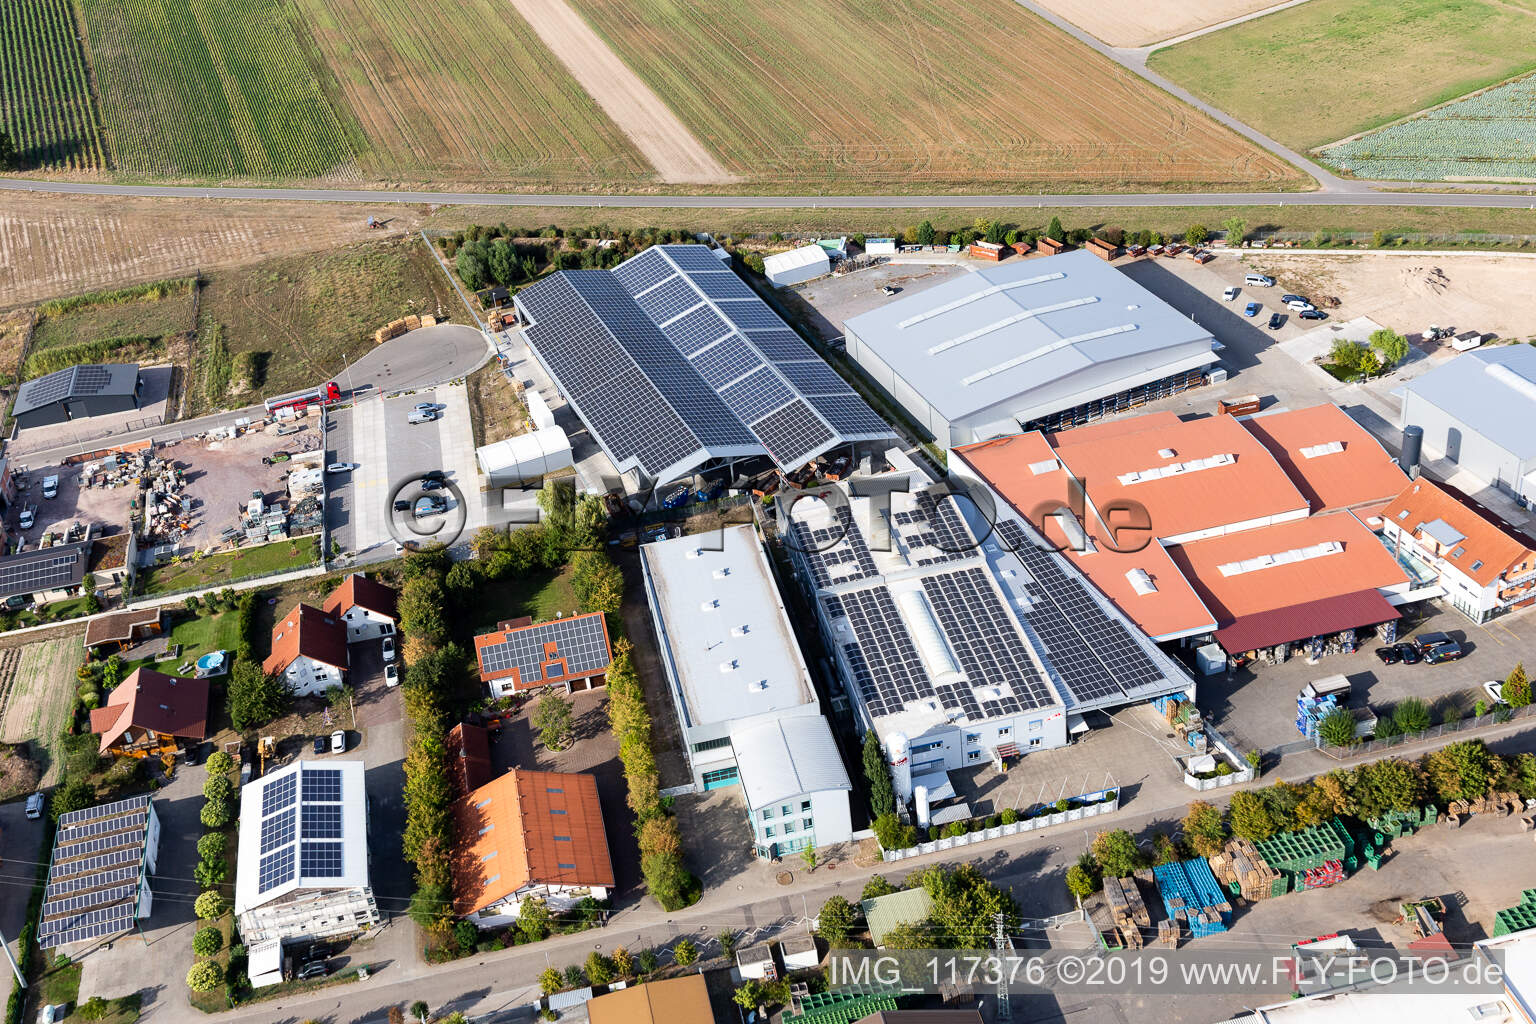 Commercial area Im Gereut, HGGS LaserCUT GmbH & Co. KG in Hatzenbühl in the state Rhineland-Palatinate, Germany from a drone